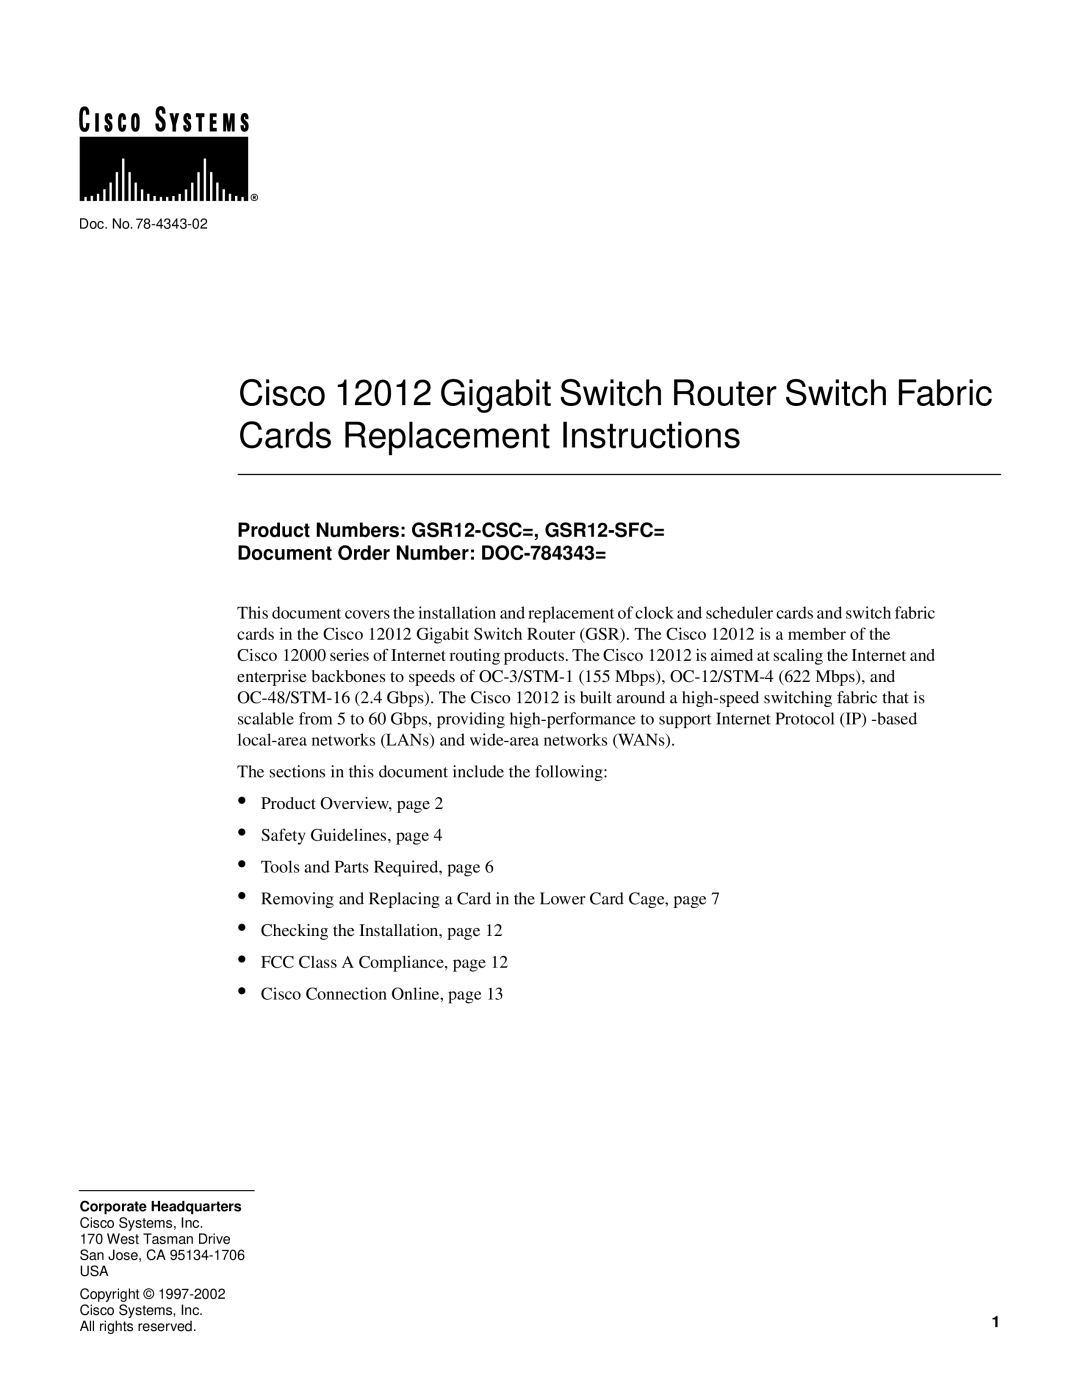 Cisco Systems manual Product Numbers GSR12-CSC=, GSR12-SFC=, Document Order Number DOC-784343= 